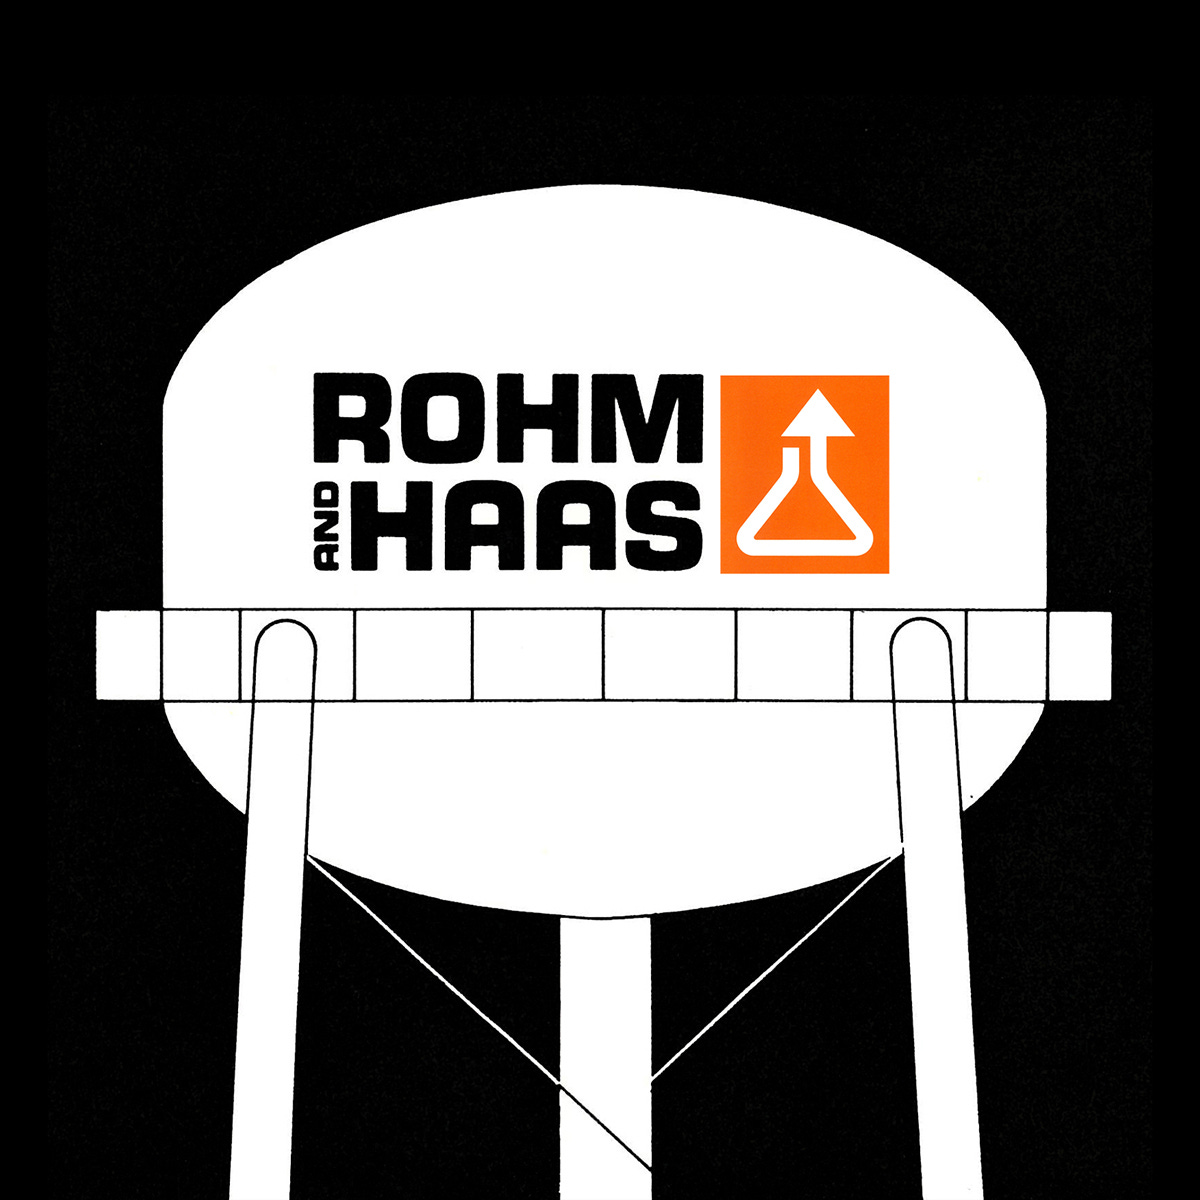 Clifford Stead Jr. and Lester Beall's 1965 logo for Rohm and Haas